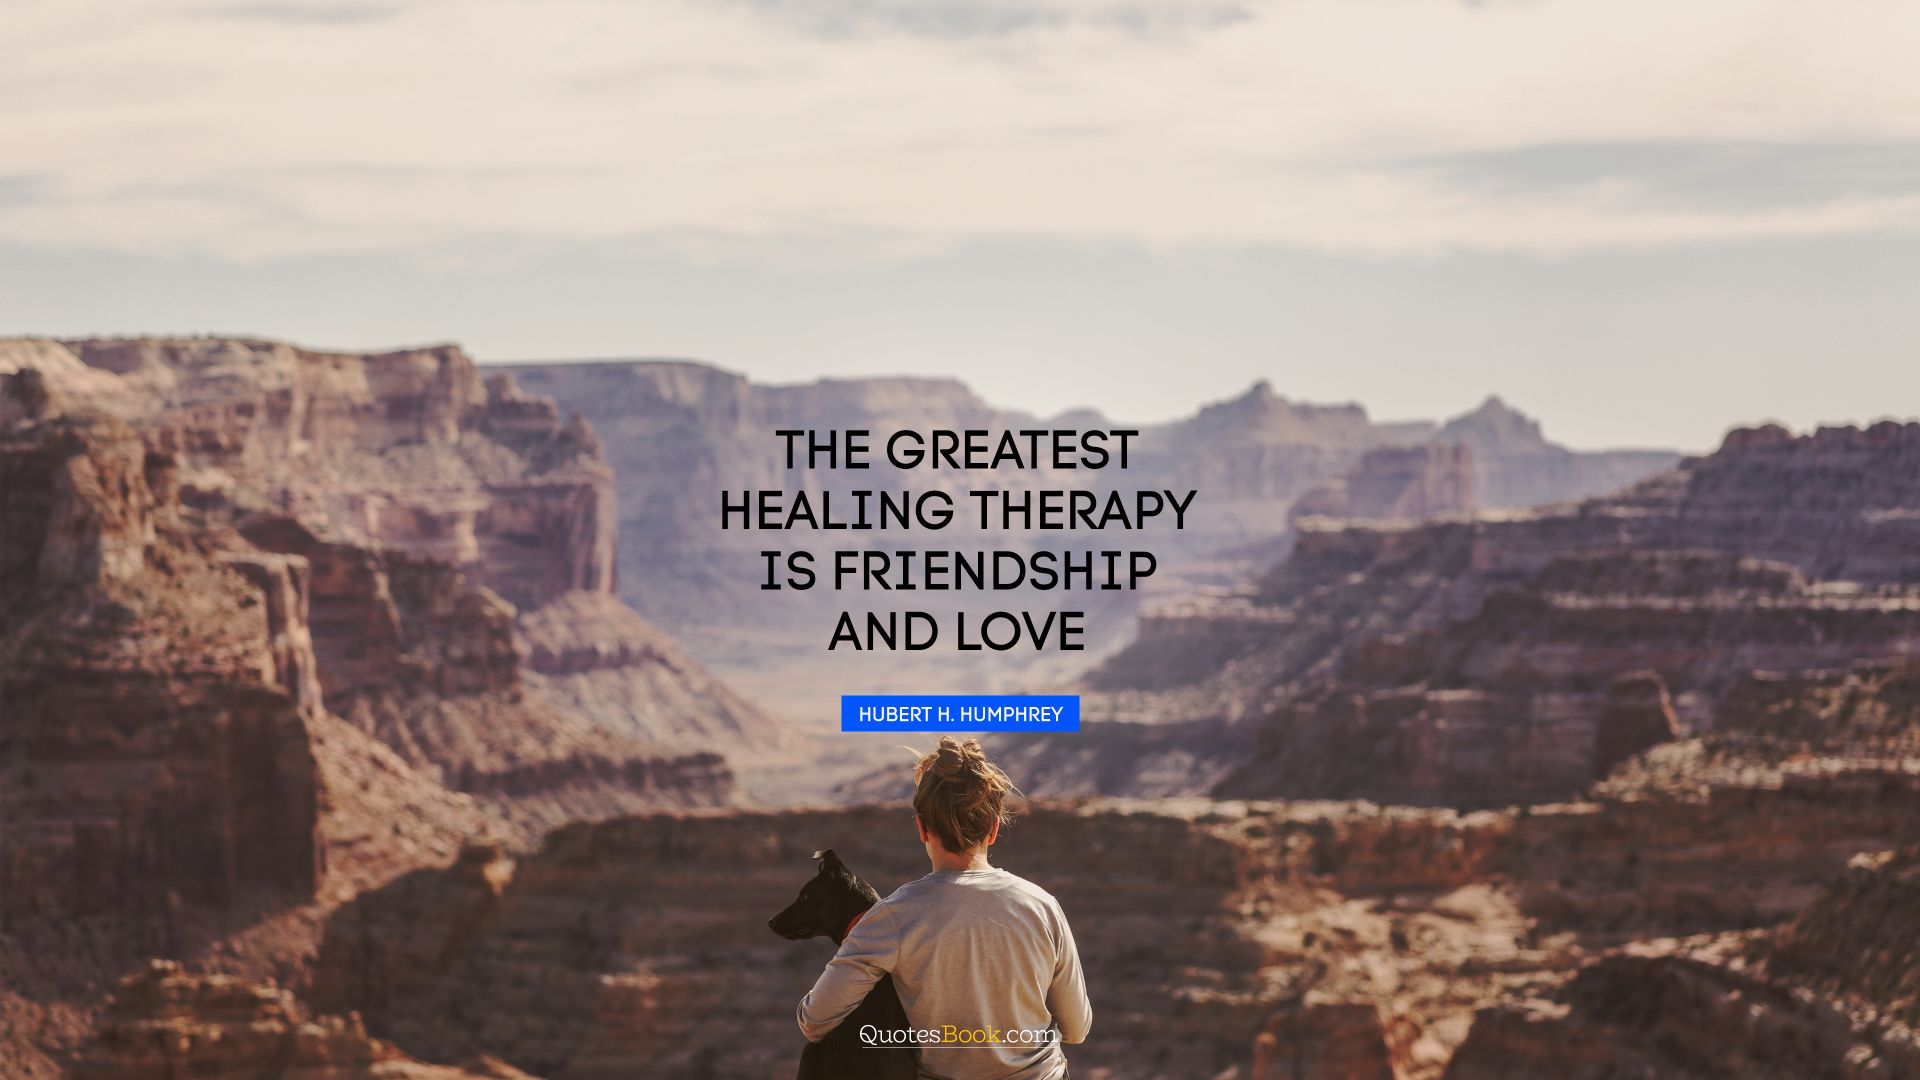 The greatest healing therapy is friendship and love. - Quote by Hubert H. Humphrey